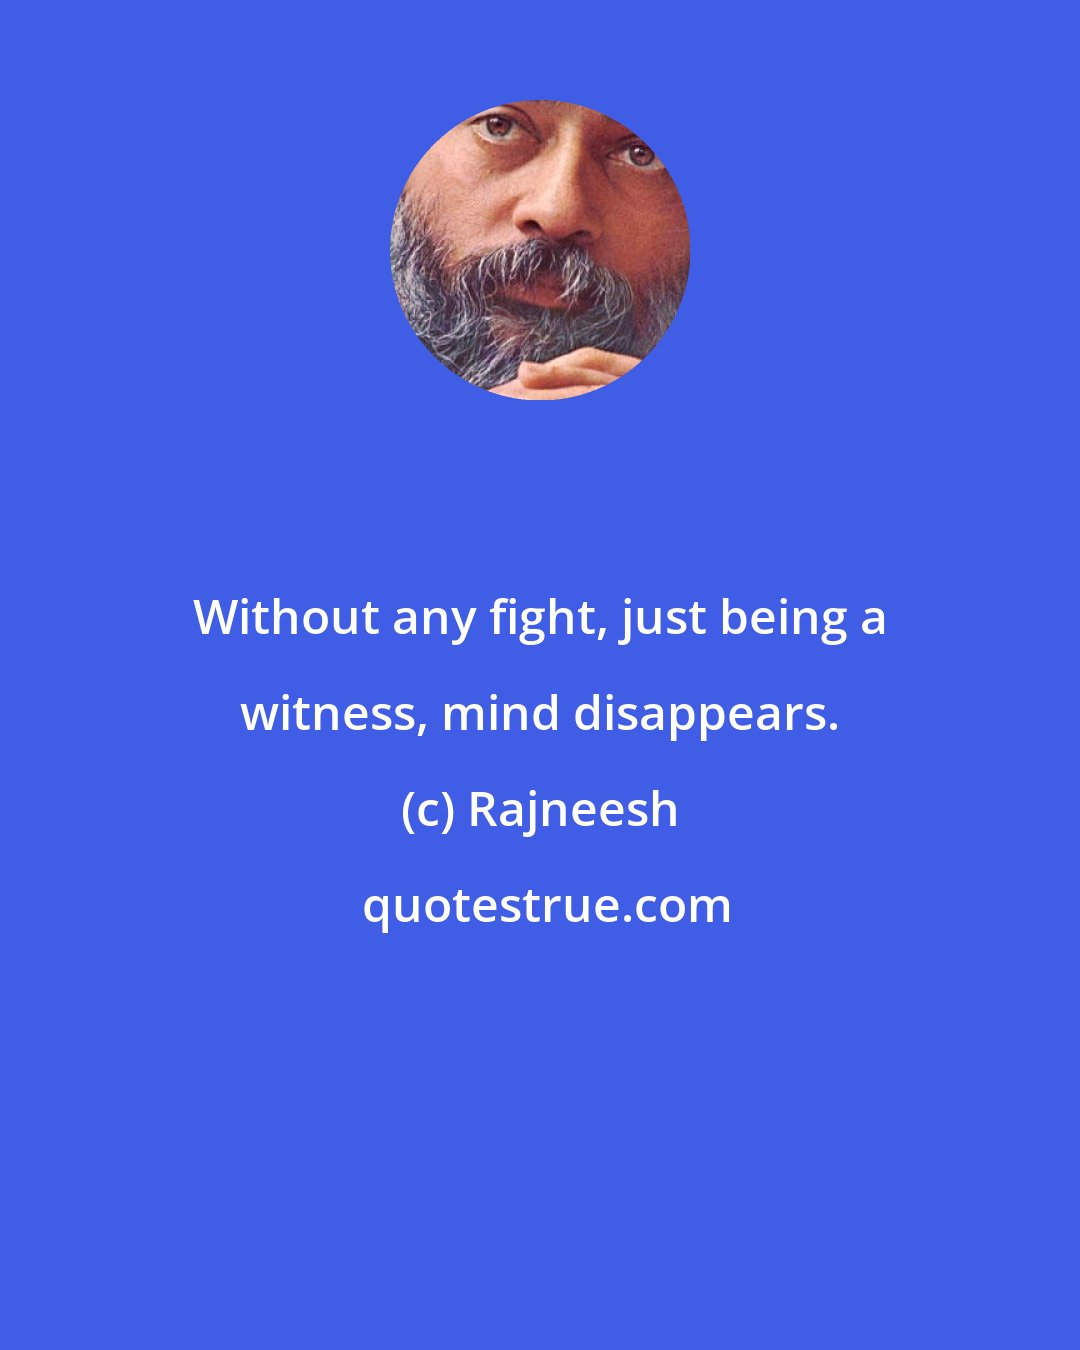 Rajneesh: Without any fight, just being a witness, mind disappears.